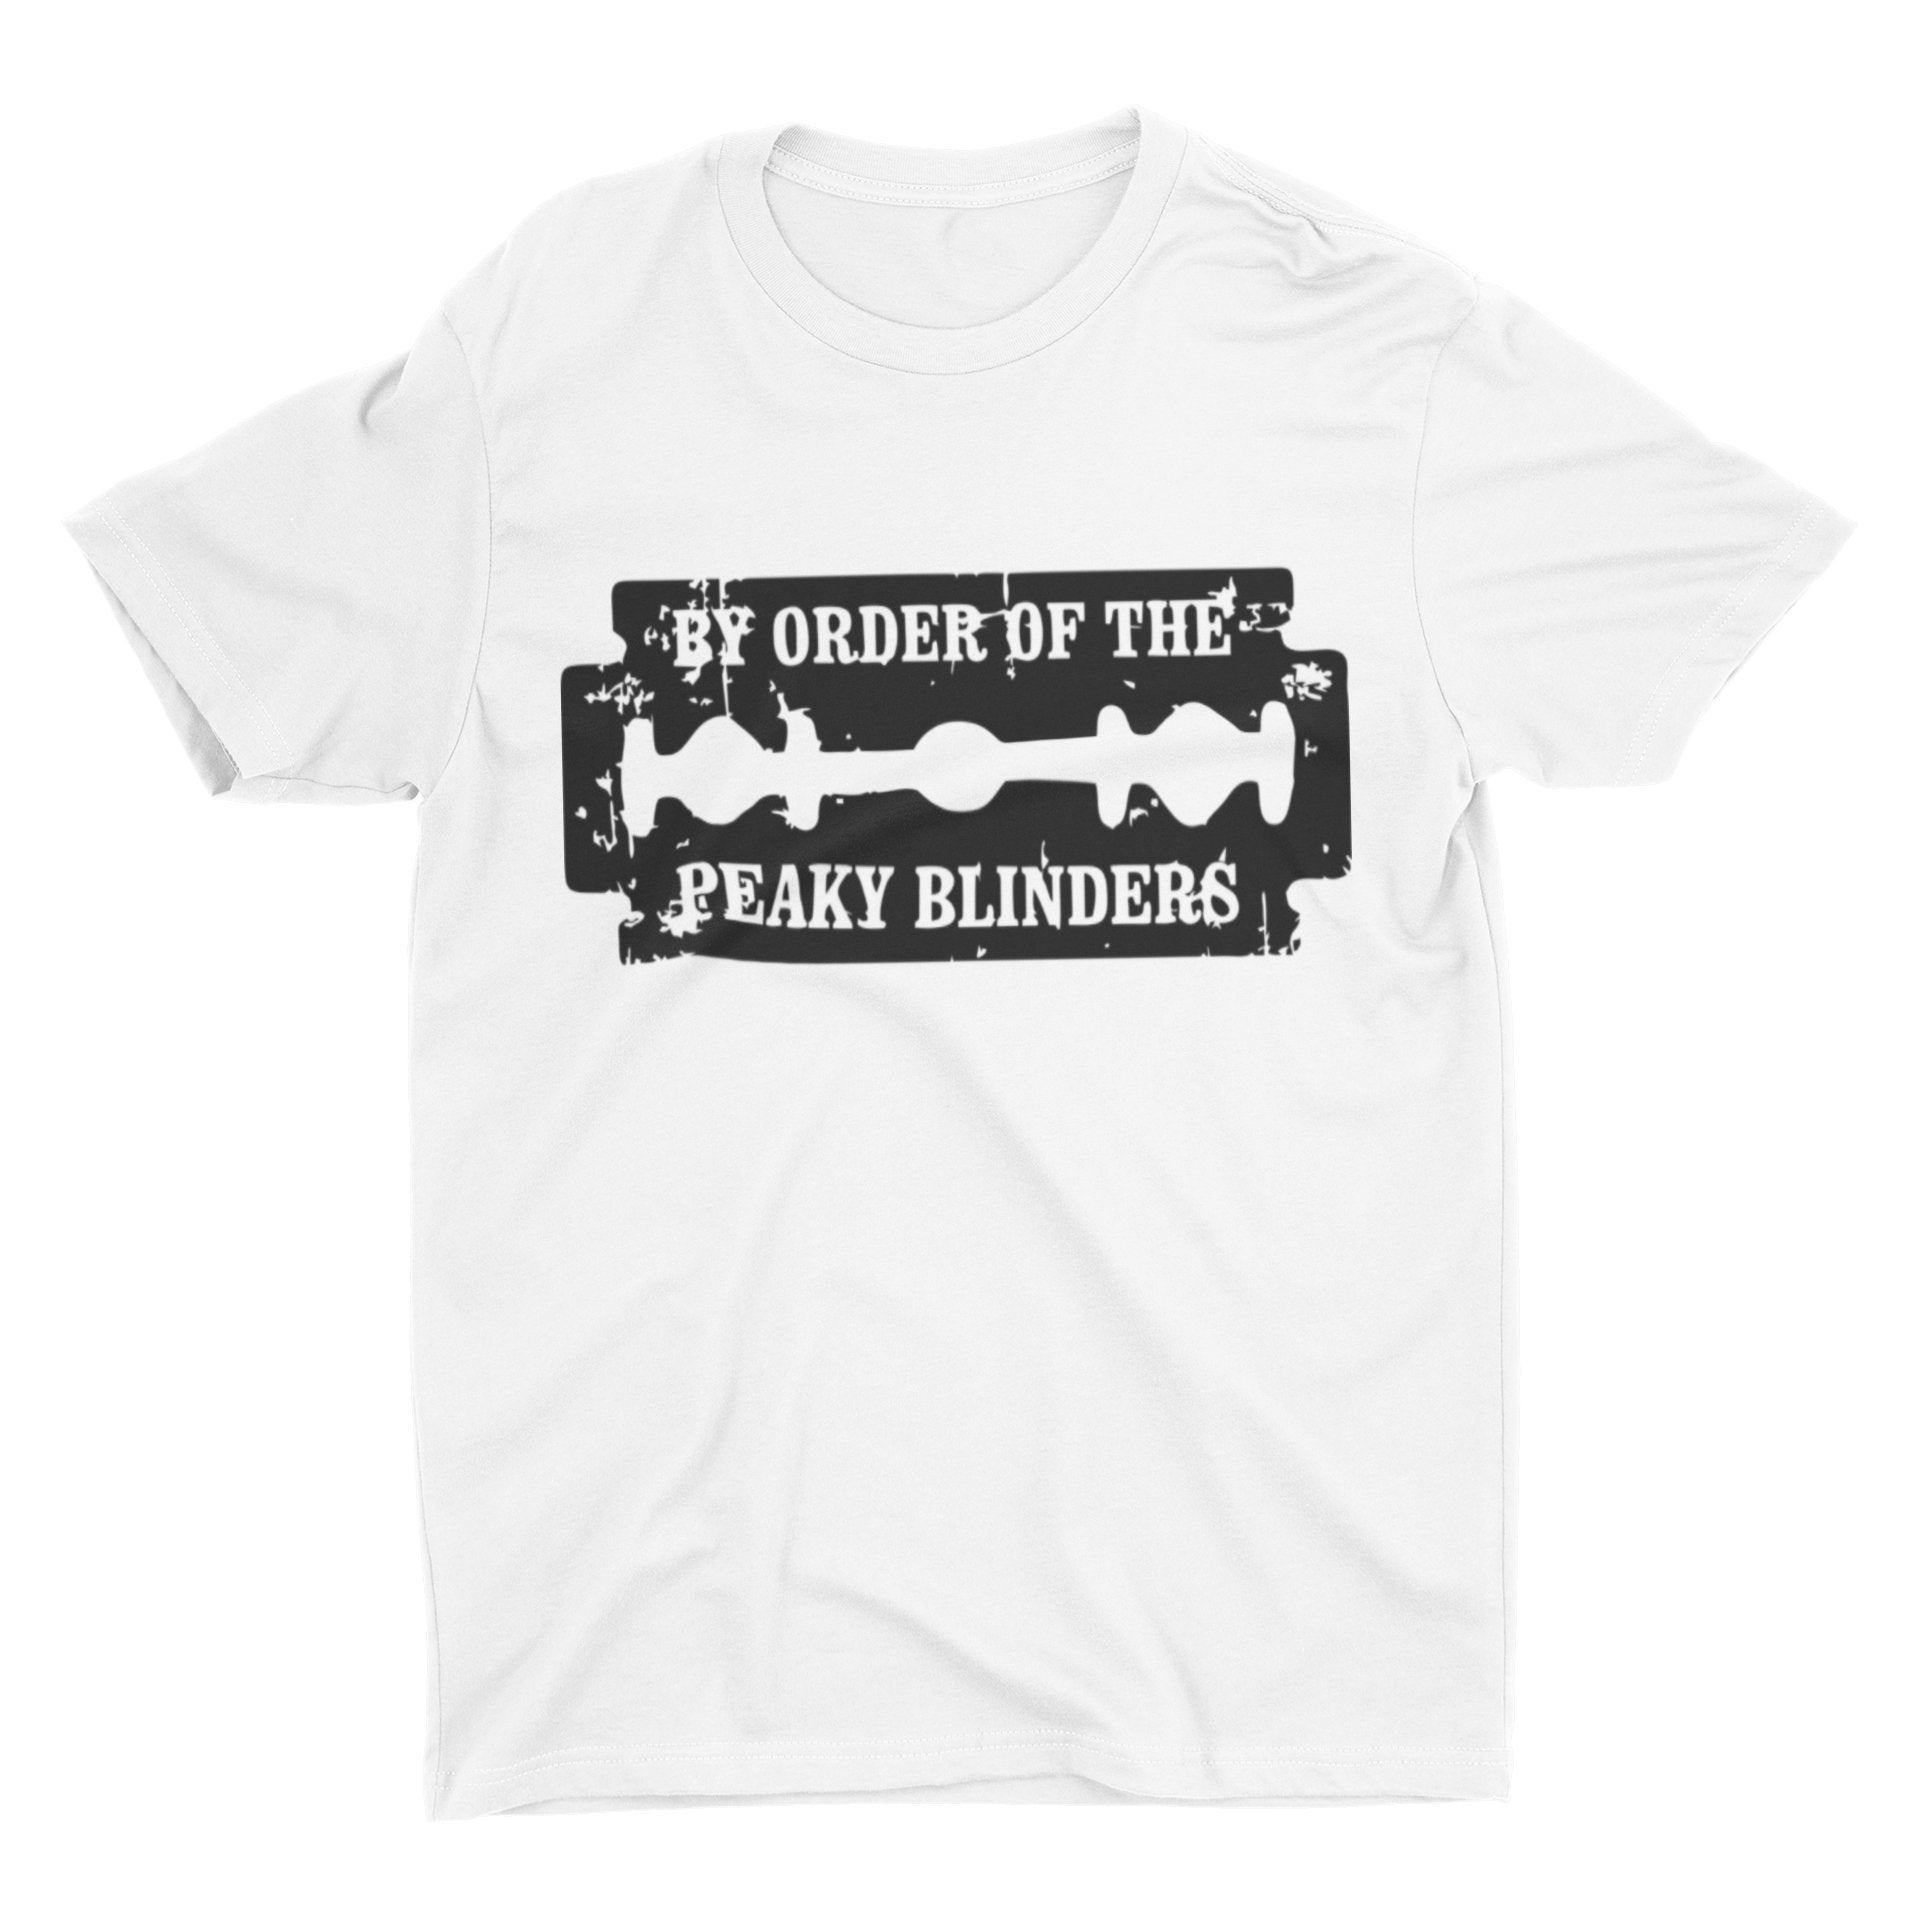 thelegalgang,By Order of the Peaky Blinders T-shirt,.